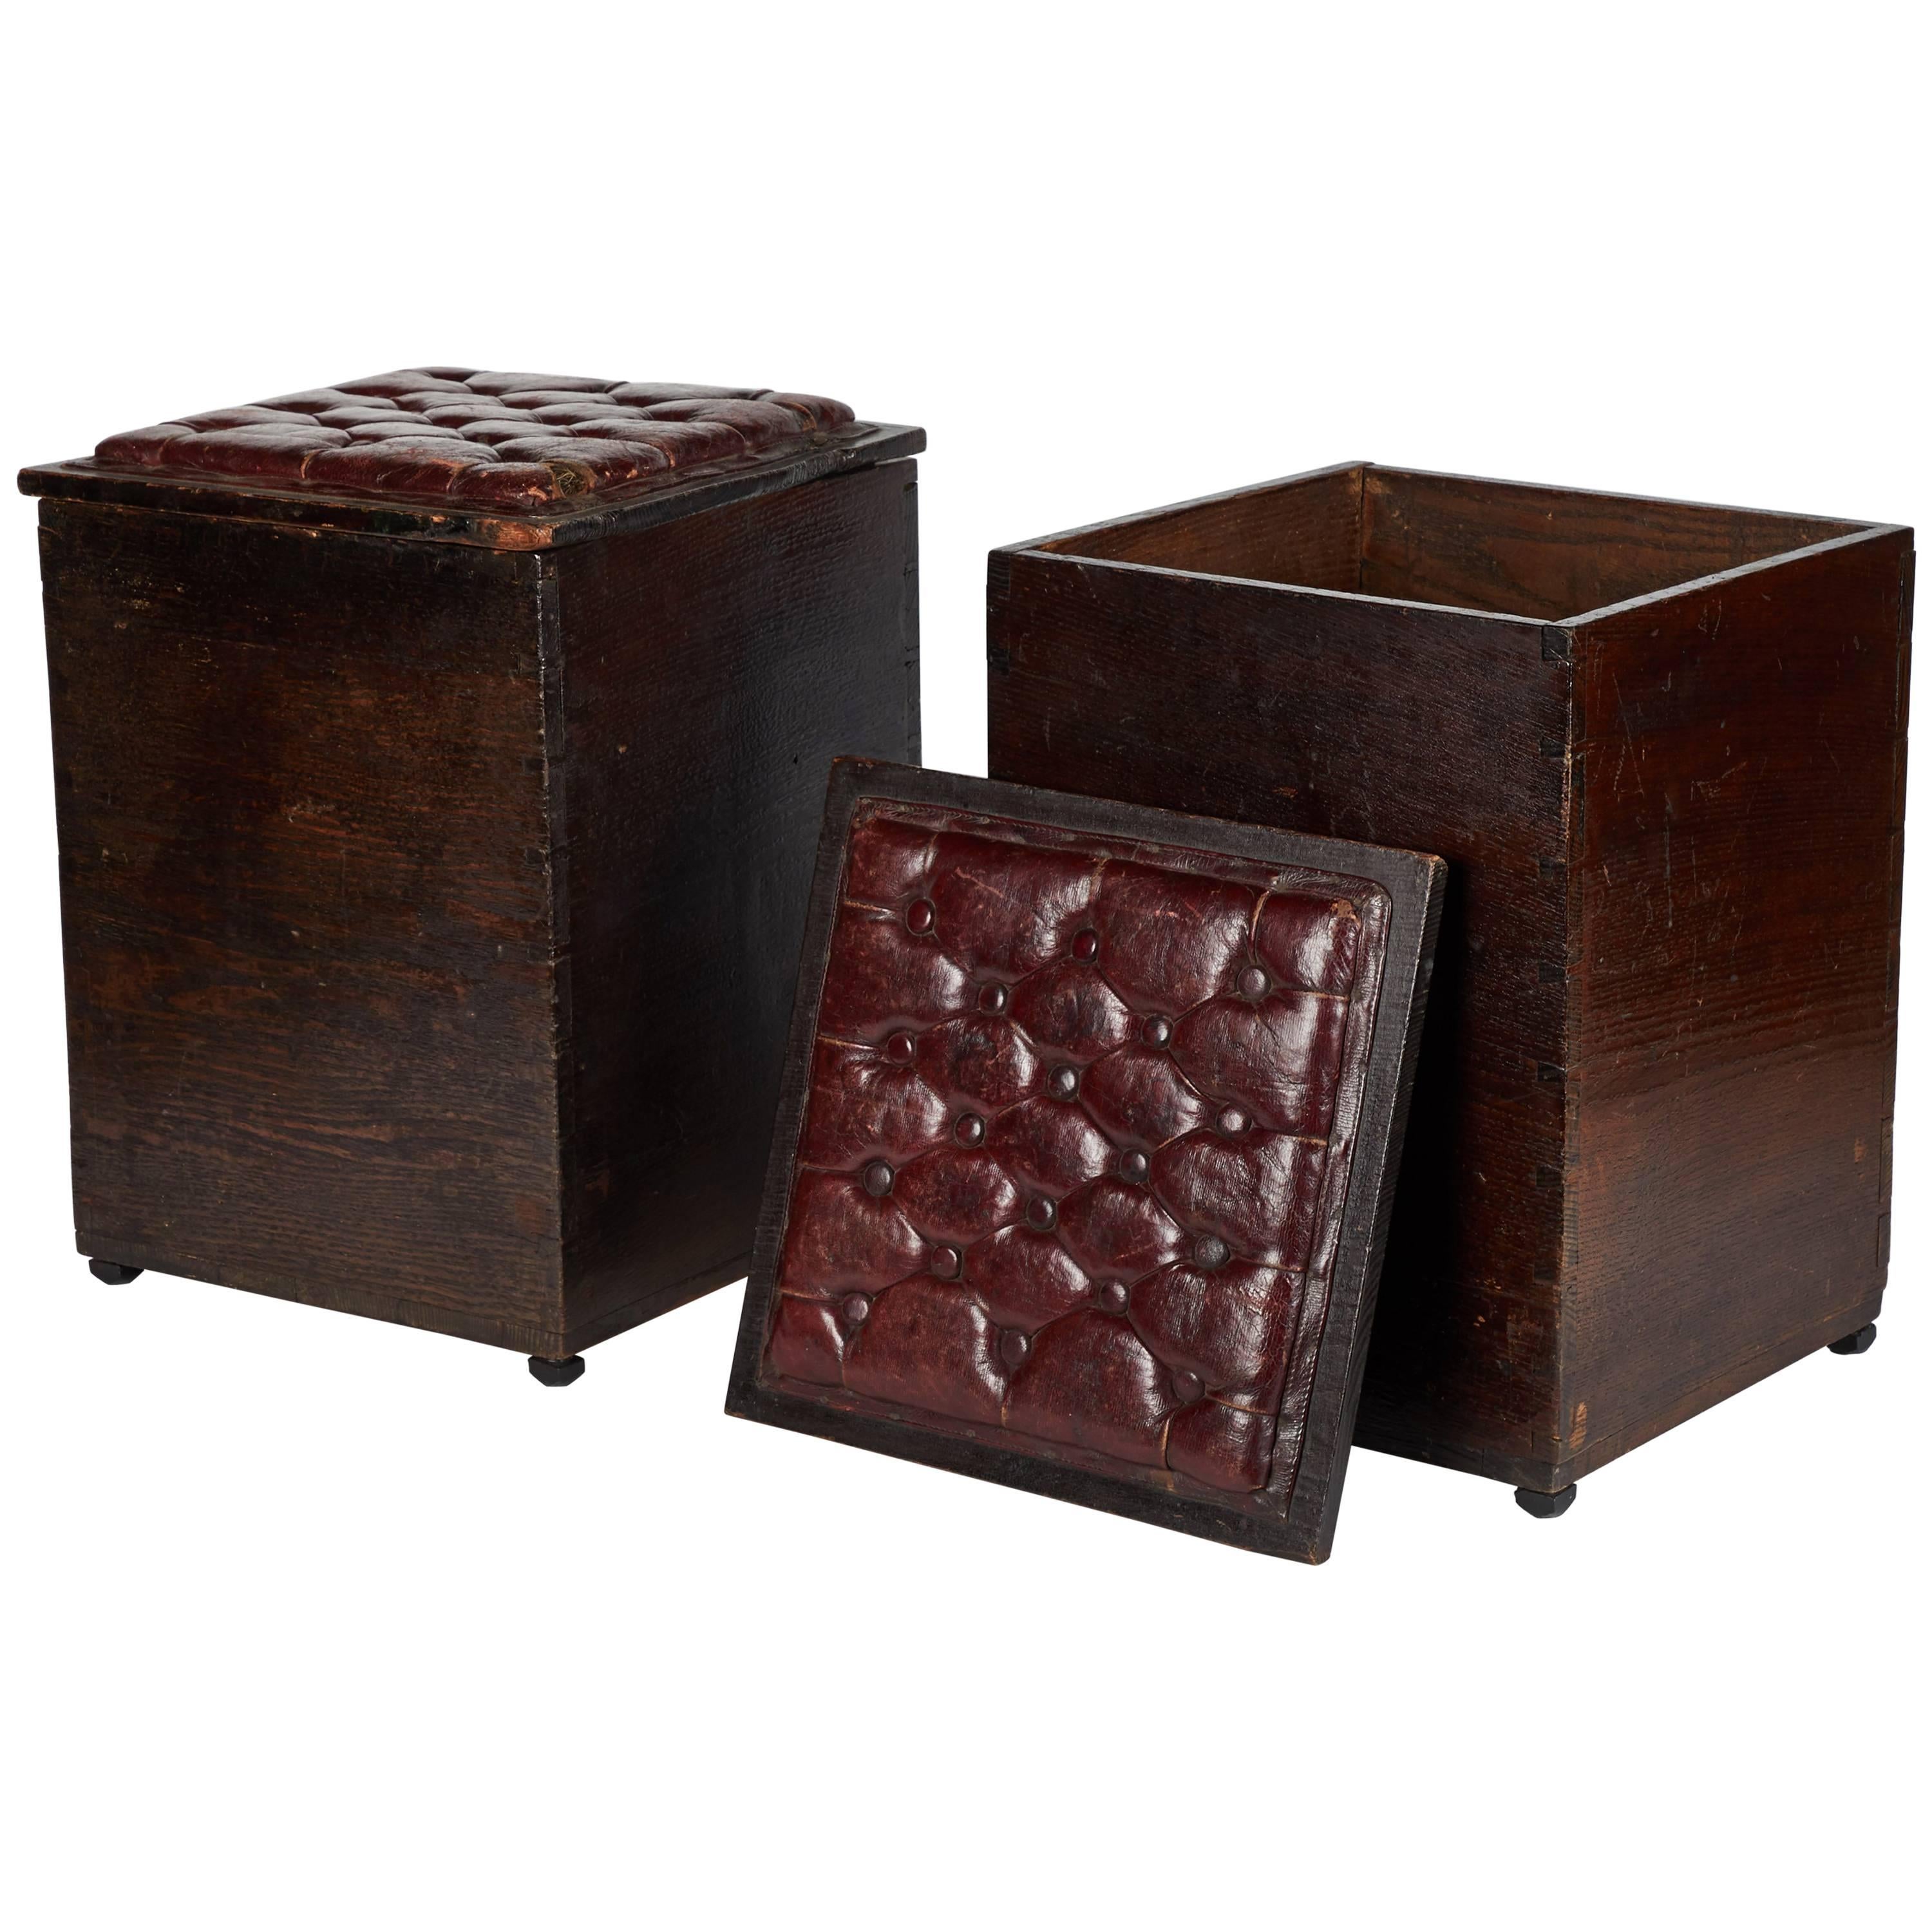 Pair of Wood and Tufted Leather Topped Stools from Late 19th Century England